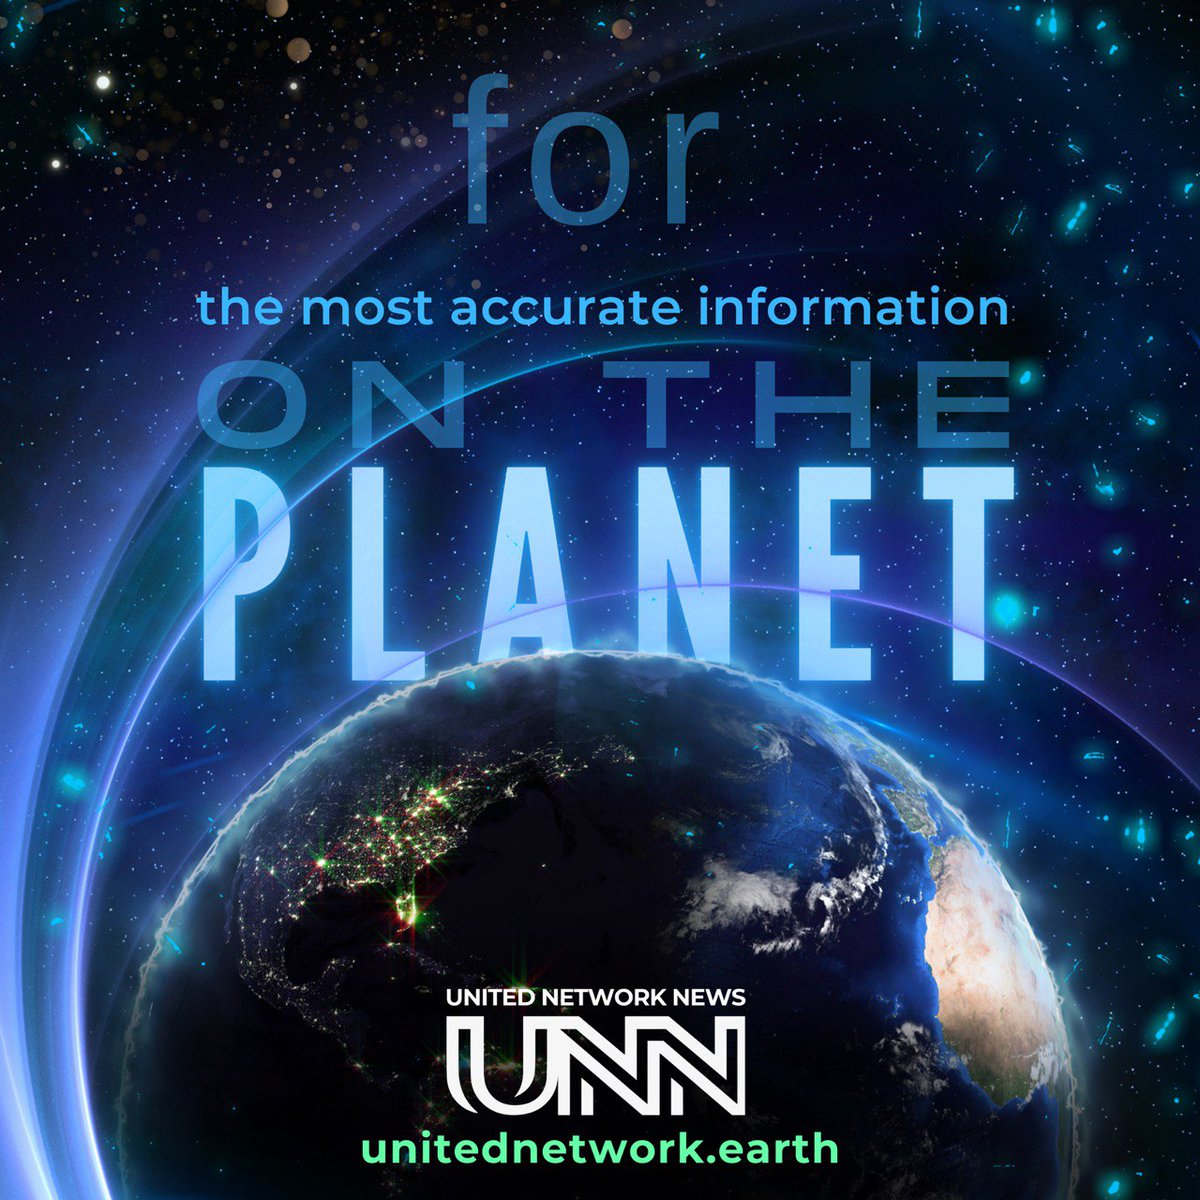 For the most accurate information on the planet, watch United Network News.
unitednetwork.earth
#universaltrust  #blackmarket #instagood  #news  #motivational #worldgovernment #usa #kimberlygoguen